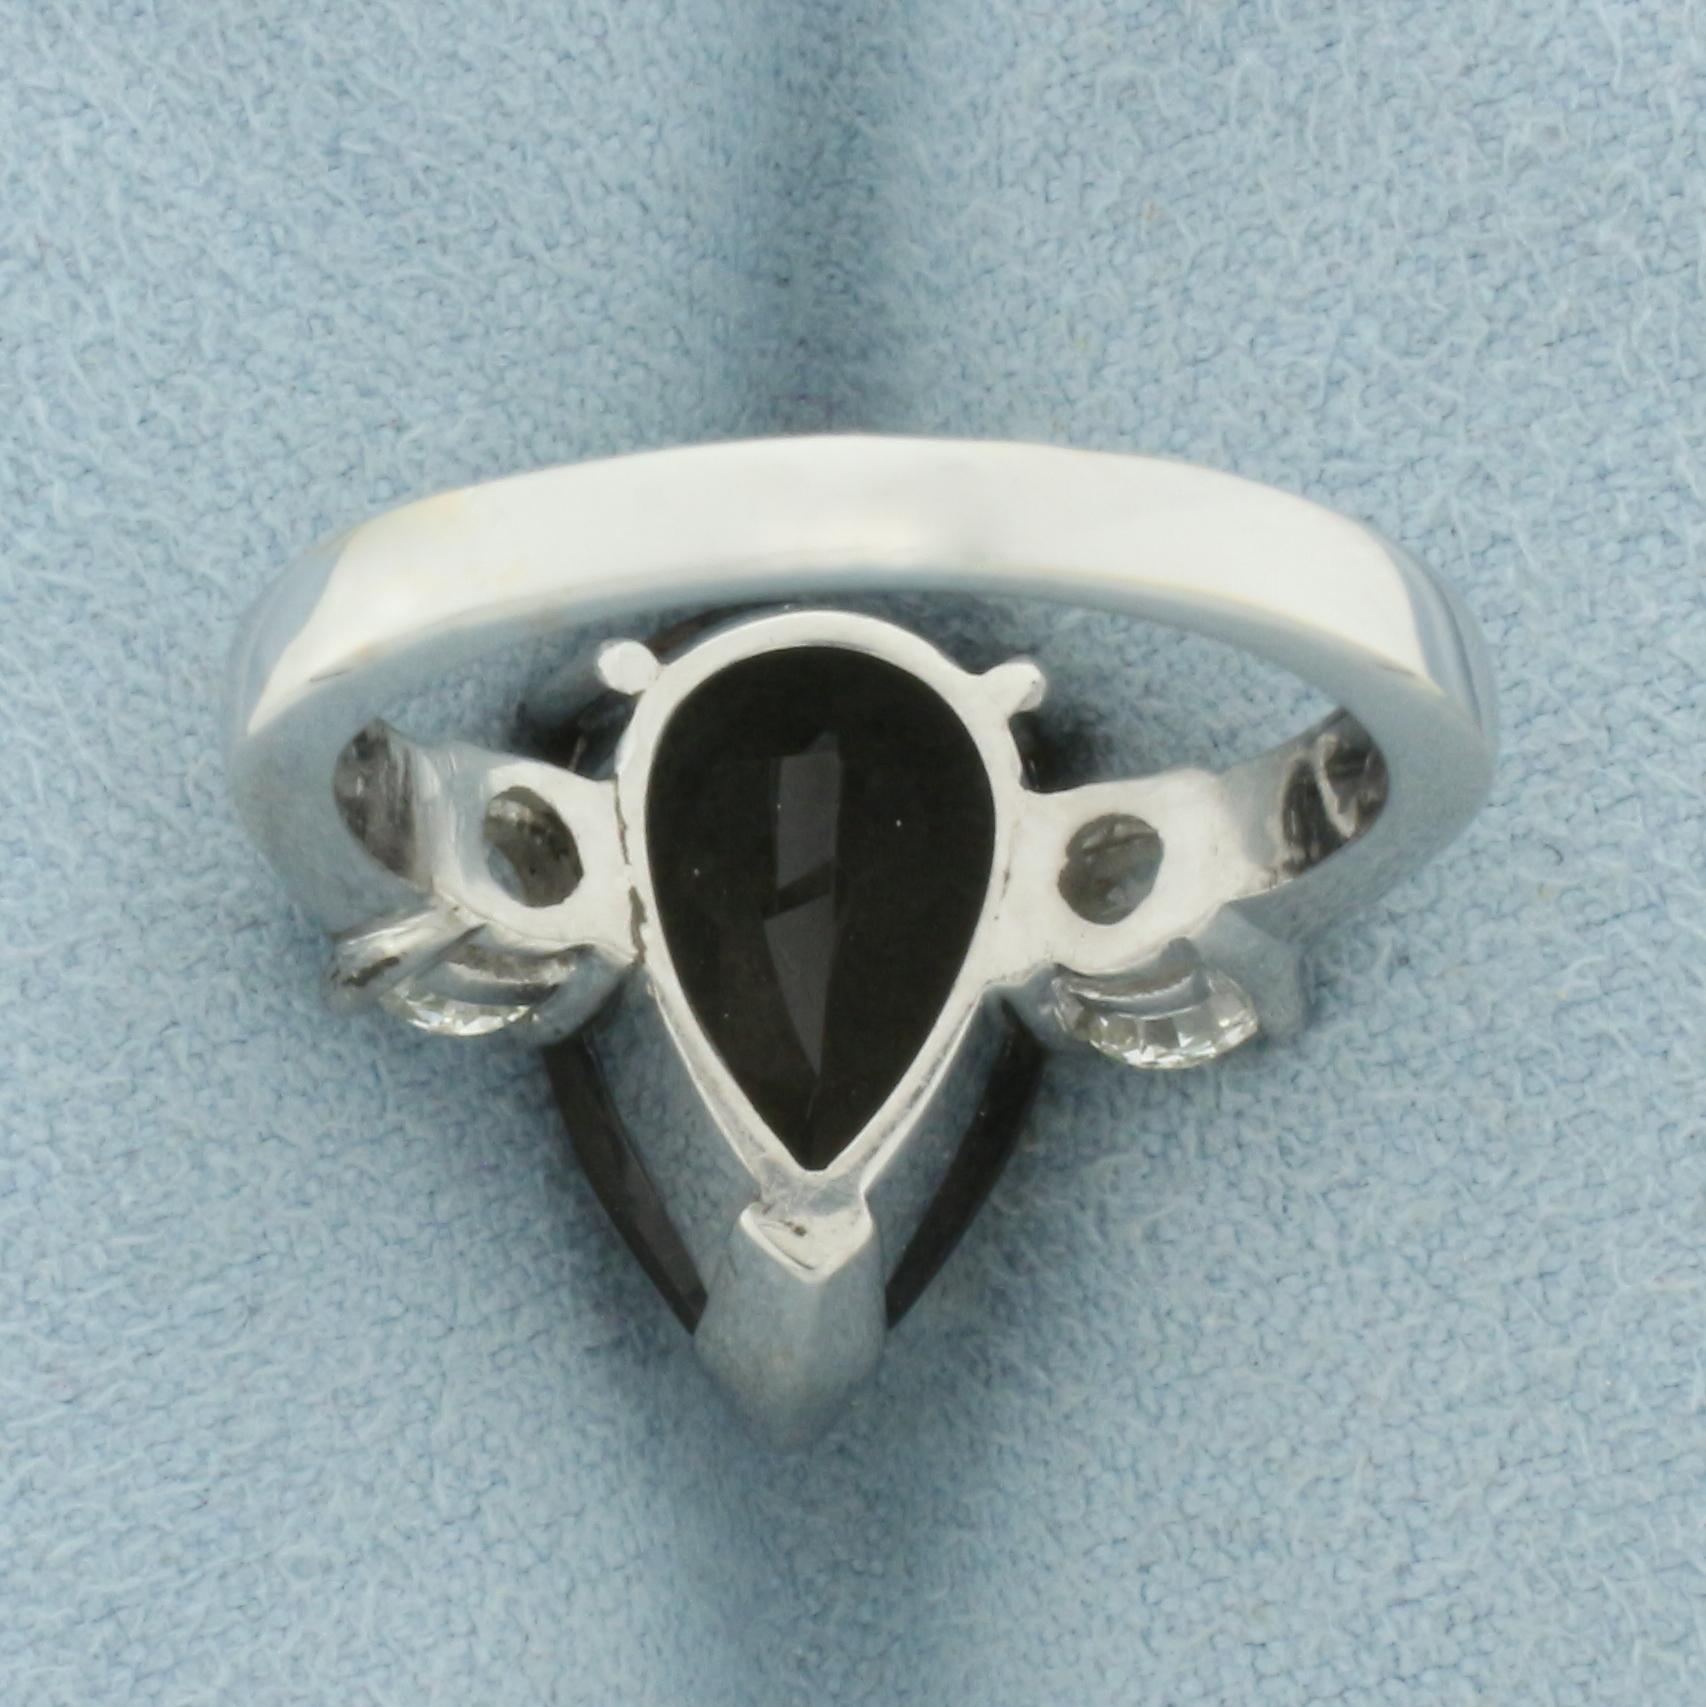 Smoky Quartz And Hearts On Fire Diamond Ring In 18k White Gold